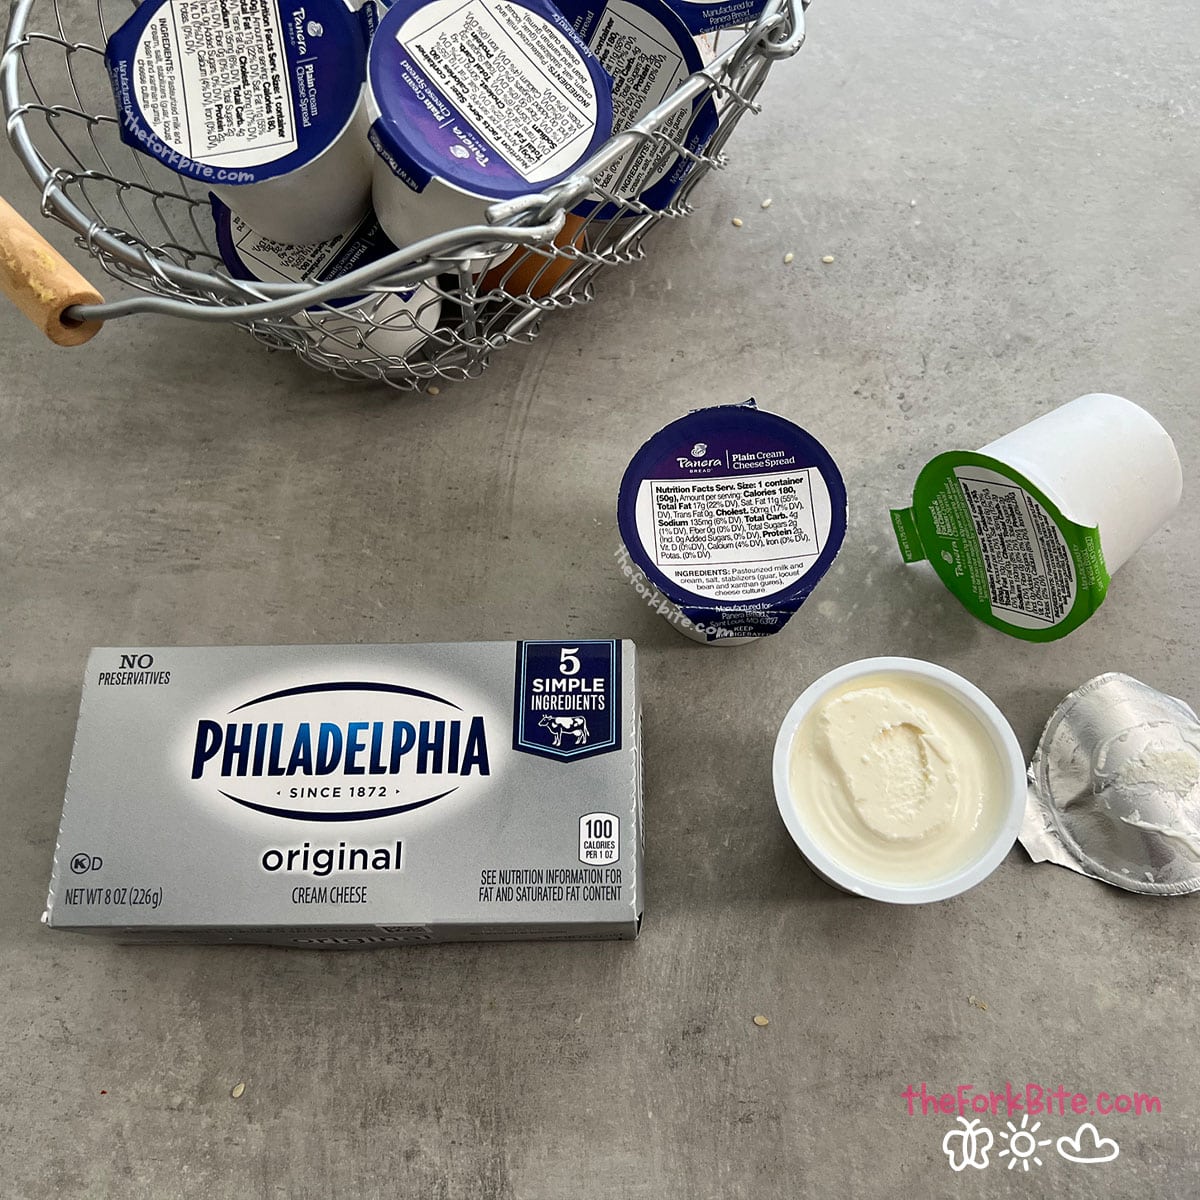 When it comes to cream cheese, there are two main choices: cream cheese and cream cheese spread which can be confusing for some people. So, what is the difference between the two? And which one is better?